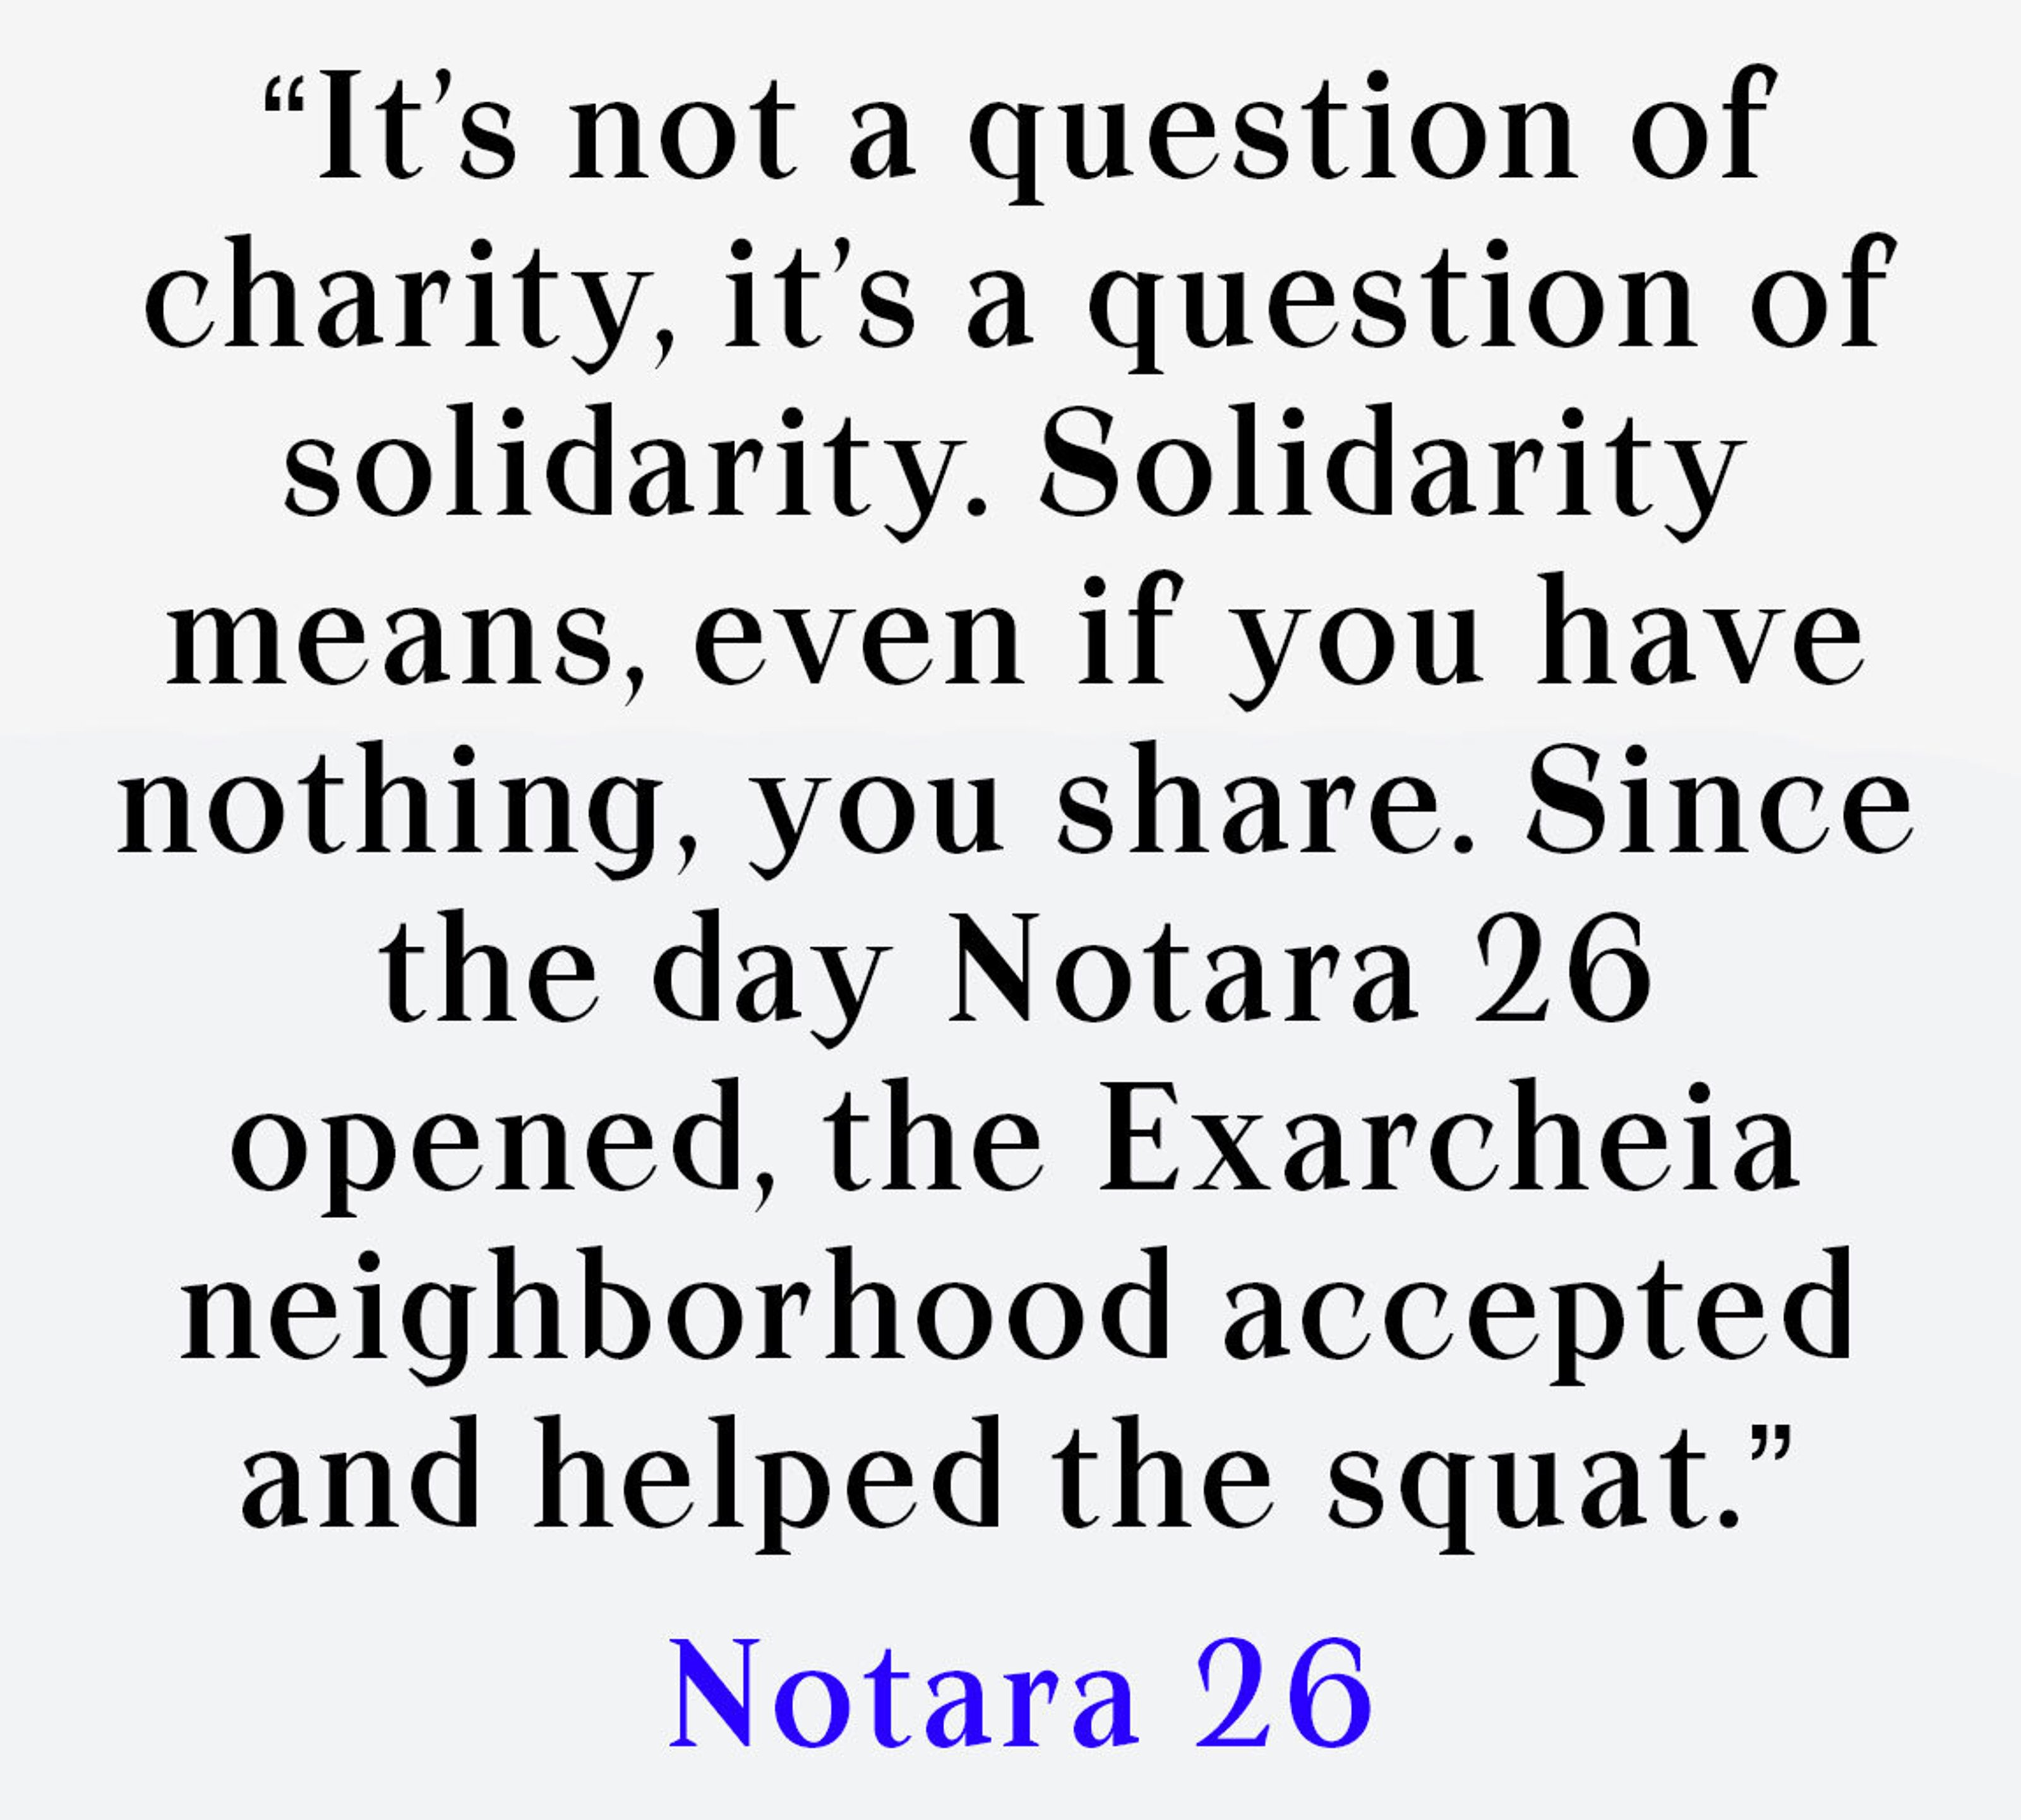 It’s not a question of charity, it’s a question of solidarity. Solidarity means, even if you have nothing, you share. Since the day Notara 26 opened, the Exarcheia neighborhood accepted and helped the squat